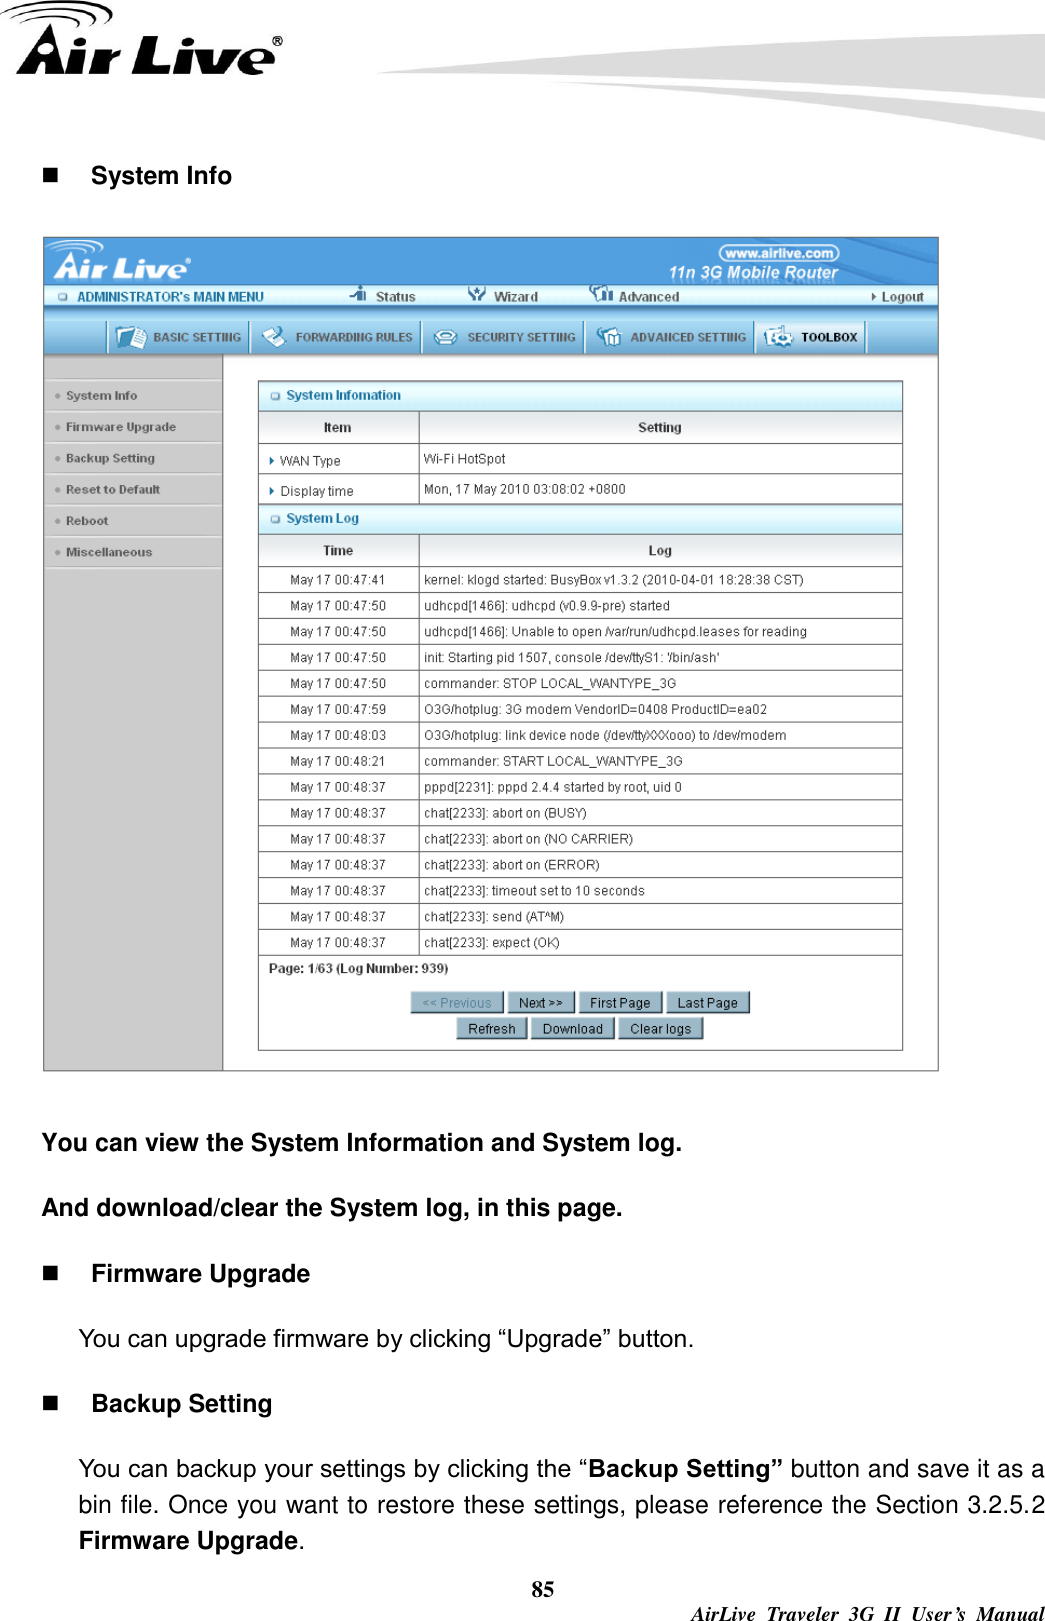  85  AirLive  Traveler  3G  II  User’s  Manual  System Info  You can view the System Information and System log. And download/clear the System log, in this page.  Firmware Upgrade You can upgrade firmware by clicking “Upgrade” button.    Backup Setting You can backup your settings by clicking the “Backup Setting” button and save it as a bin file. Once you want to restore these settings, please reference the Section 3.2.5.2 Firmware Upgrade. 